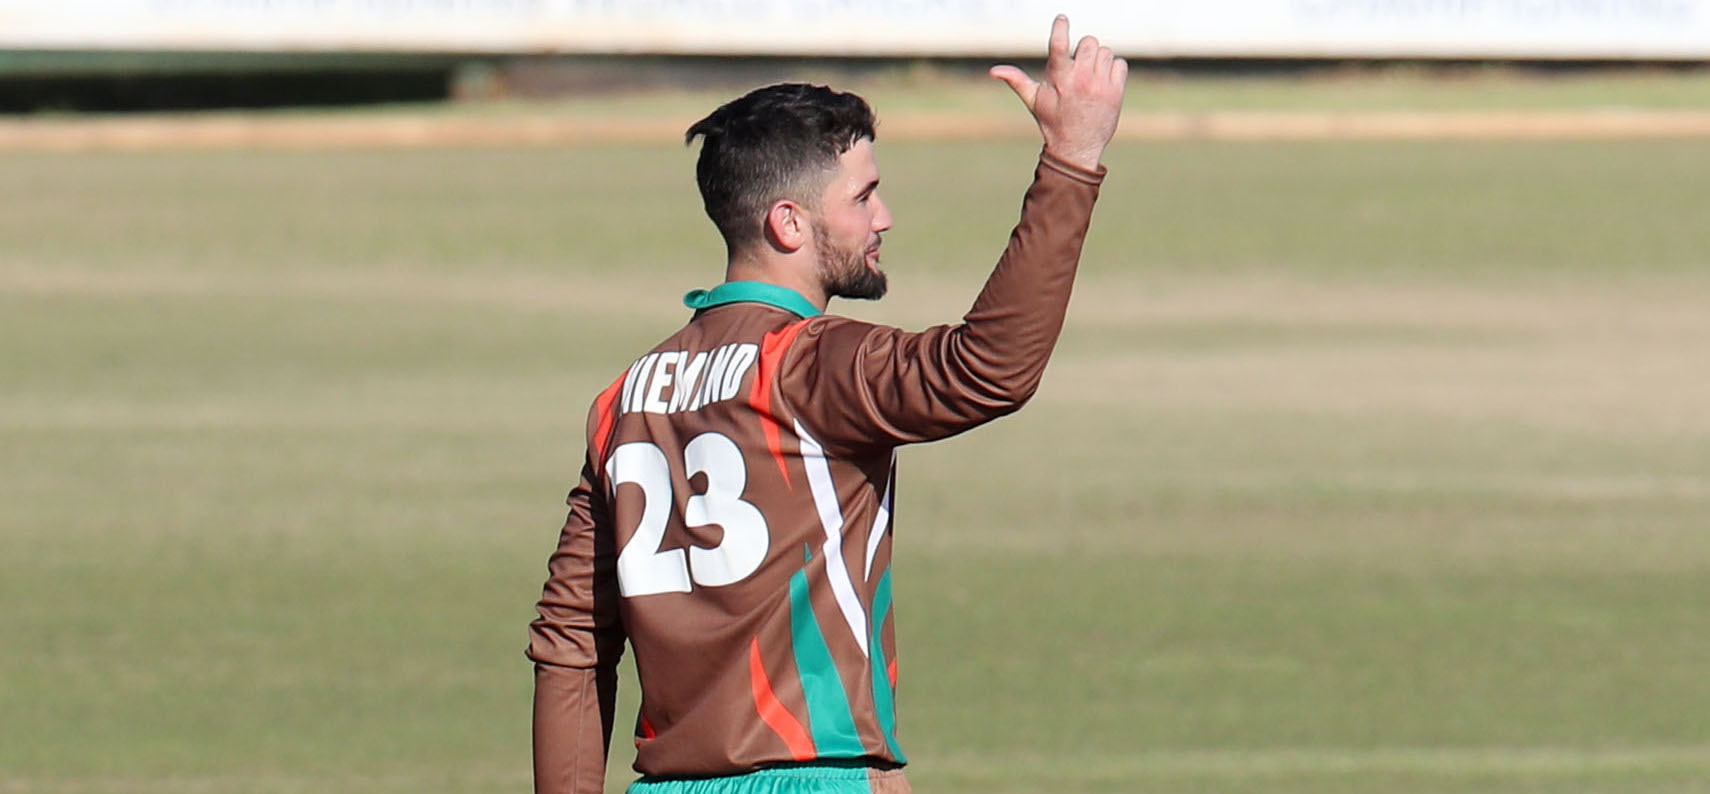 Jason Niemand: There are not enough opportunities for young cricketers